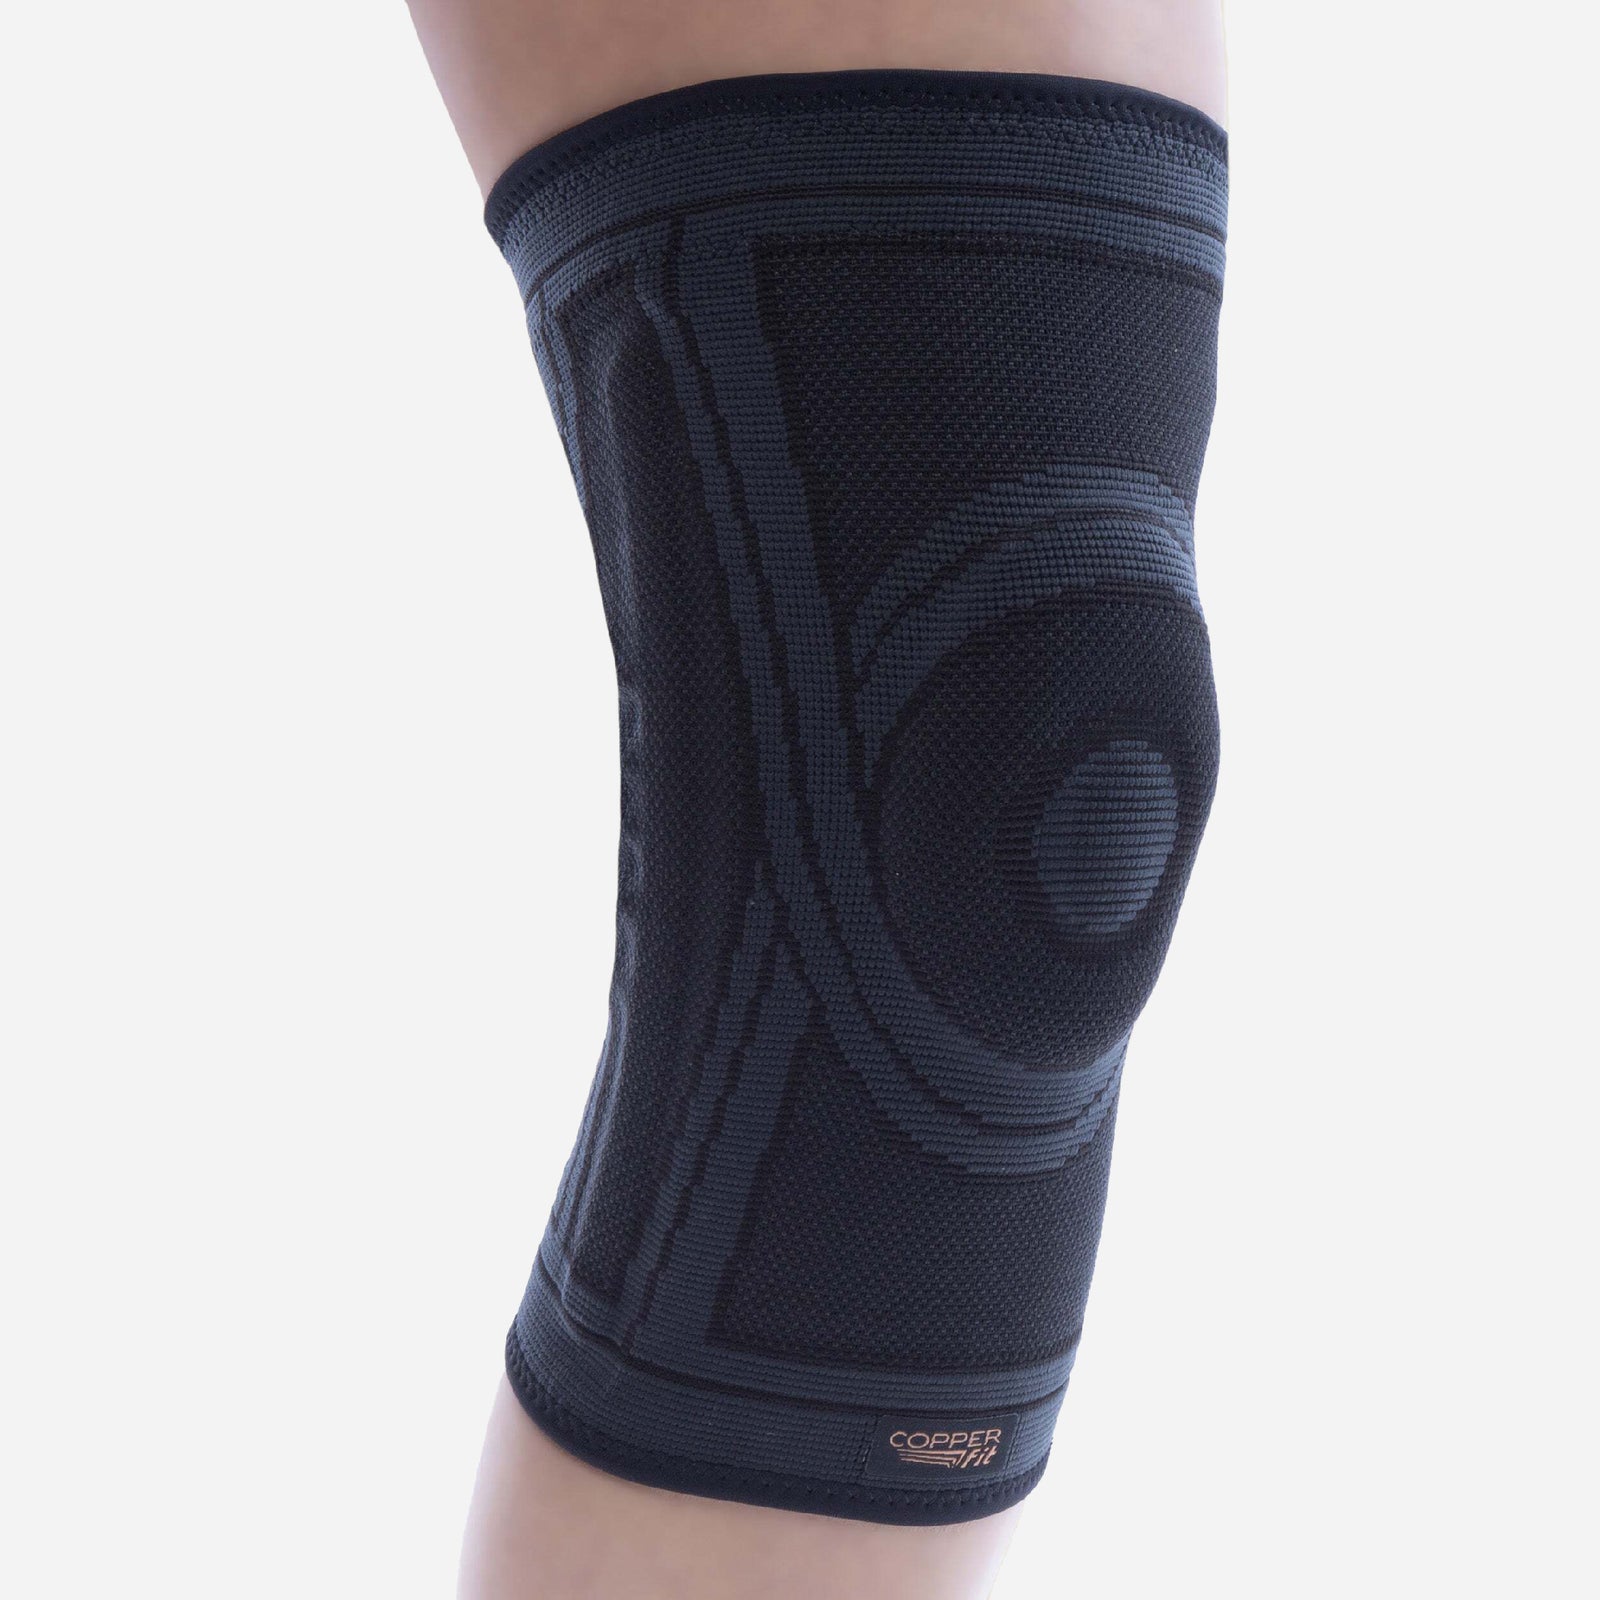 Brand New Copper Fit Elite Copper Infused Knee Compression Sleeve L/XL - 2  Pack